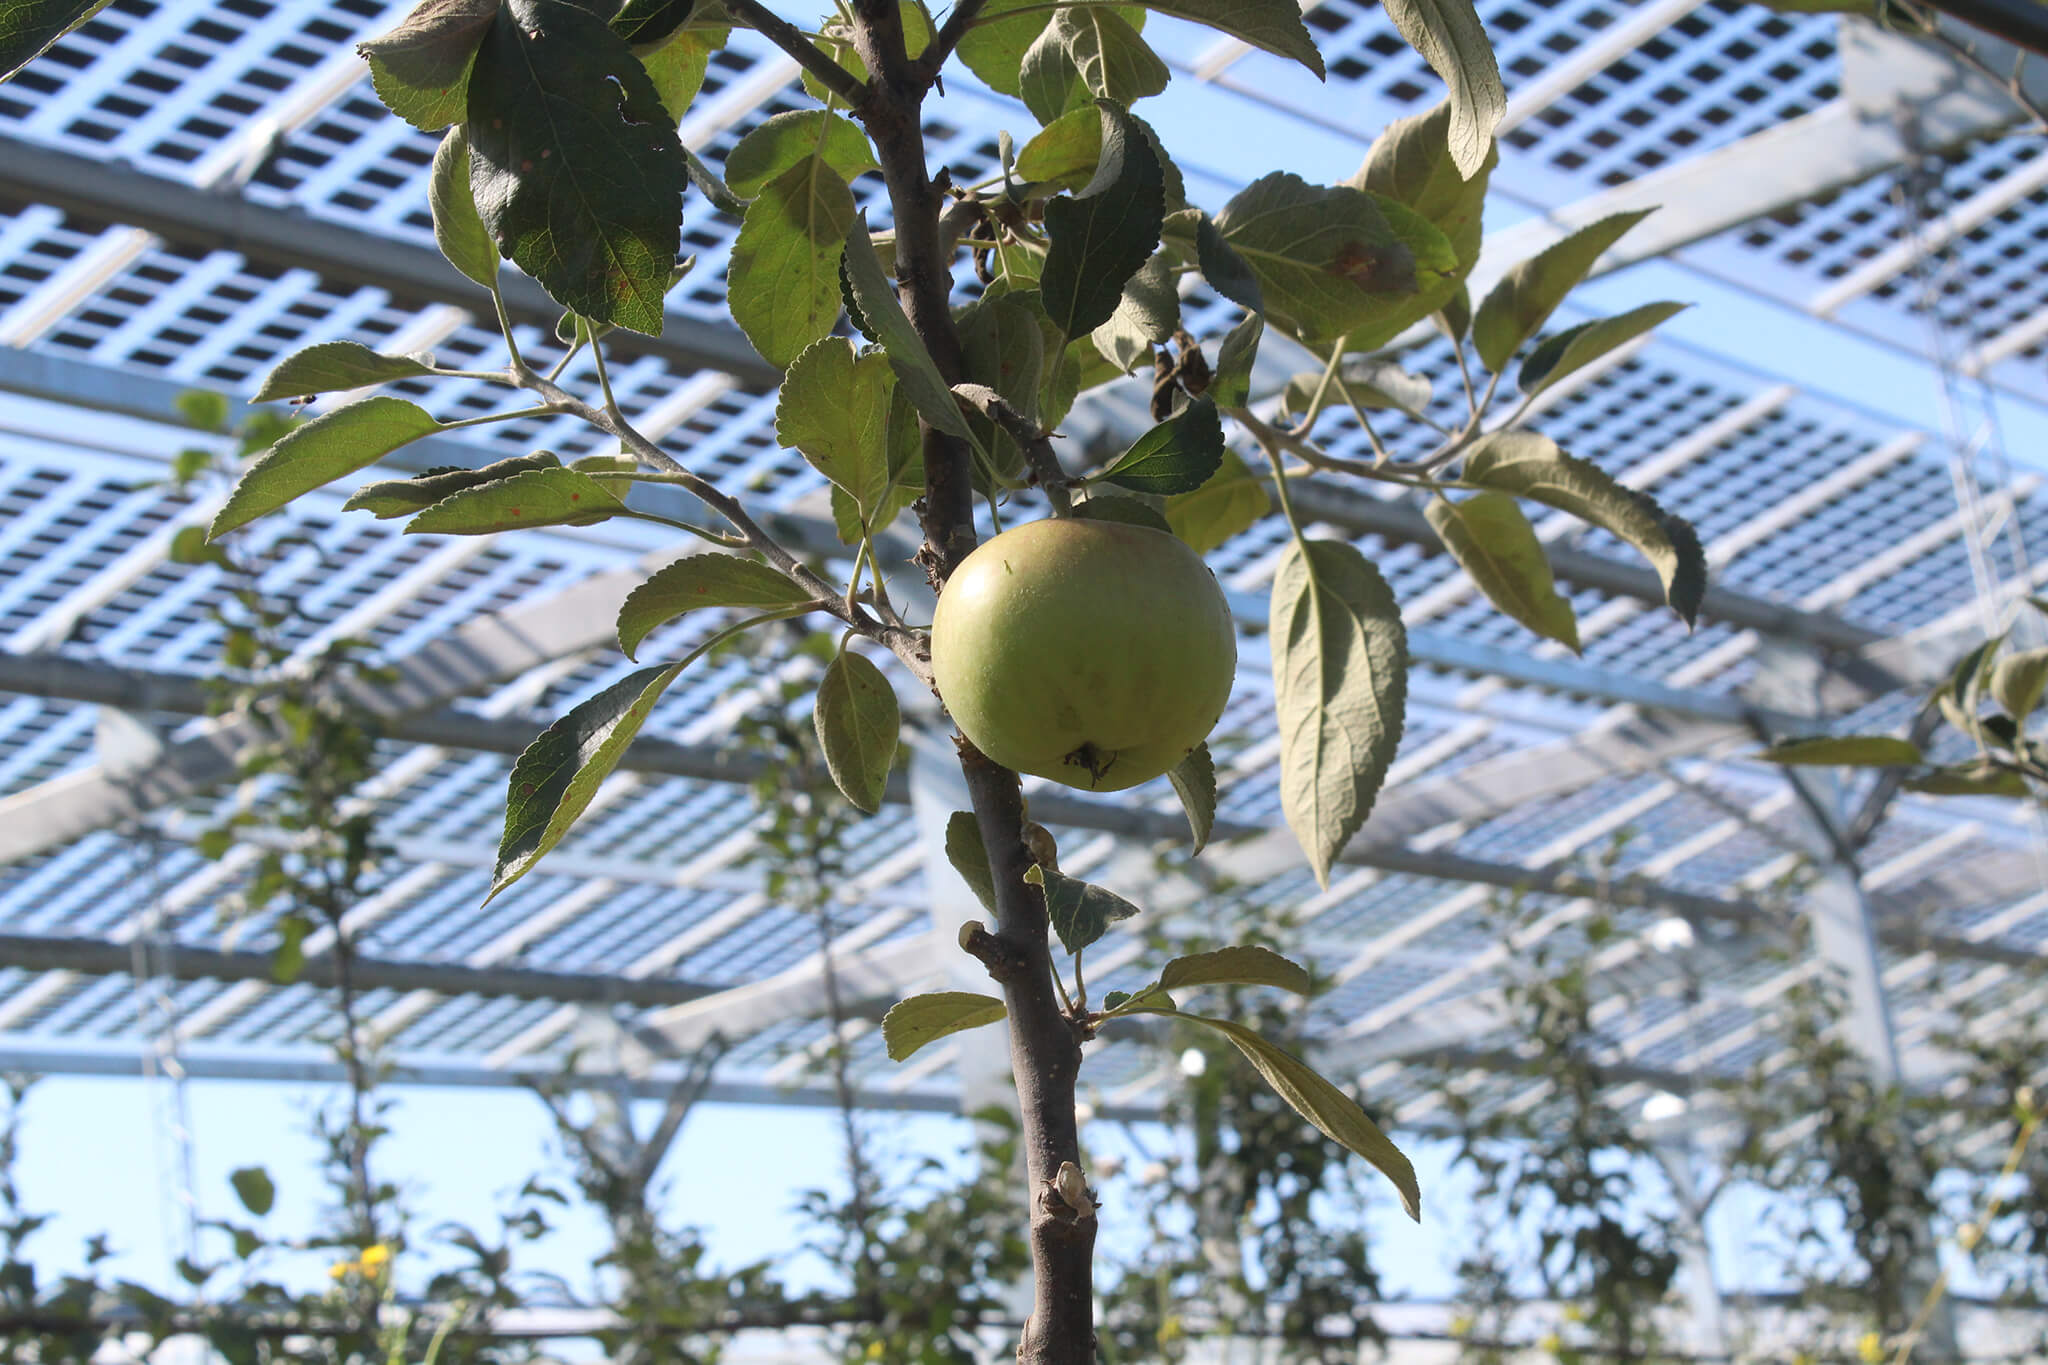 Agrivoltaic systems protect apples from harmful environmental influences